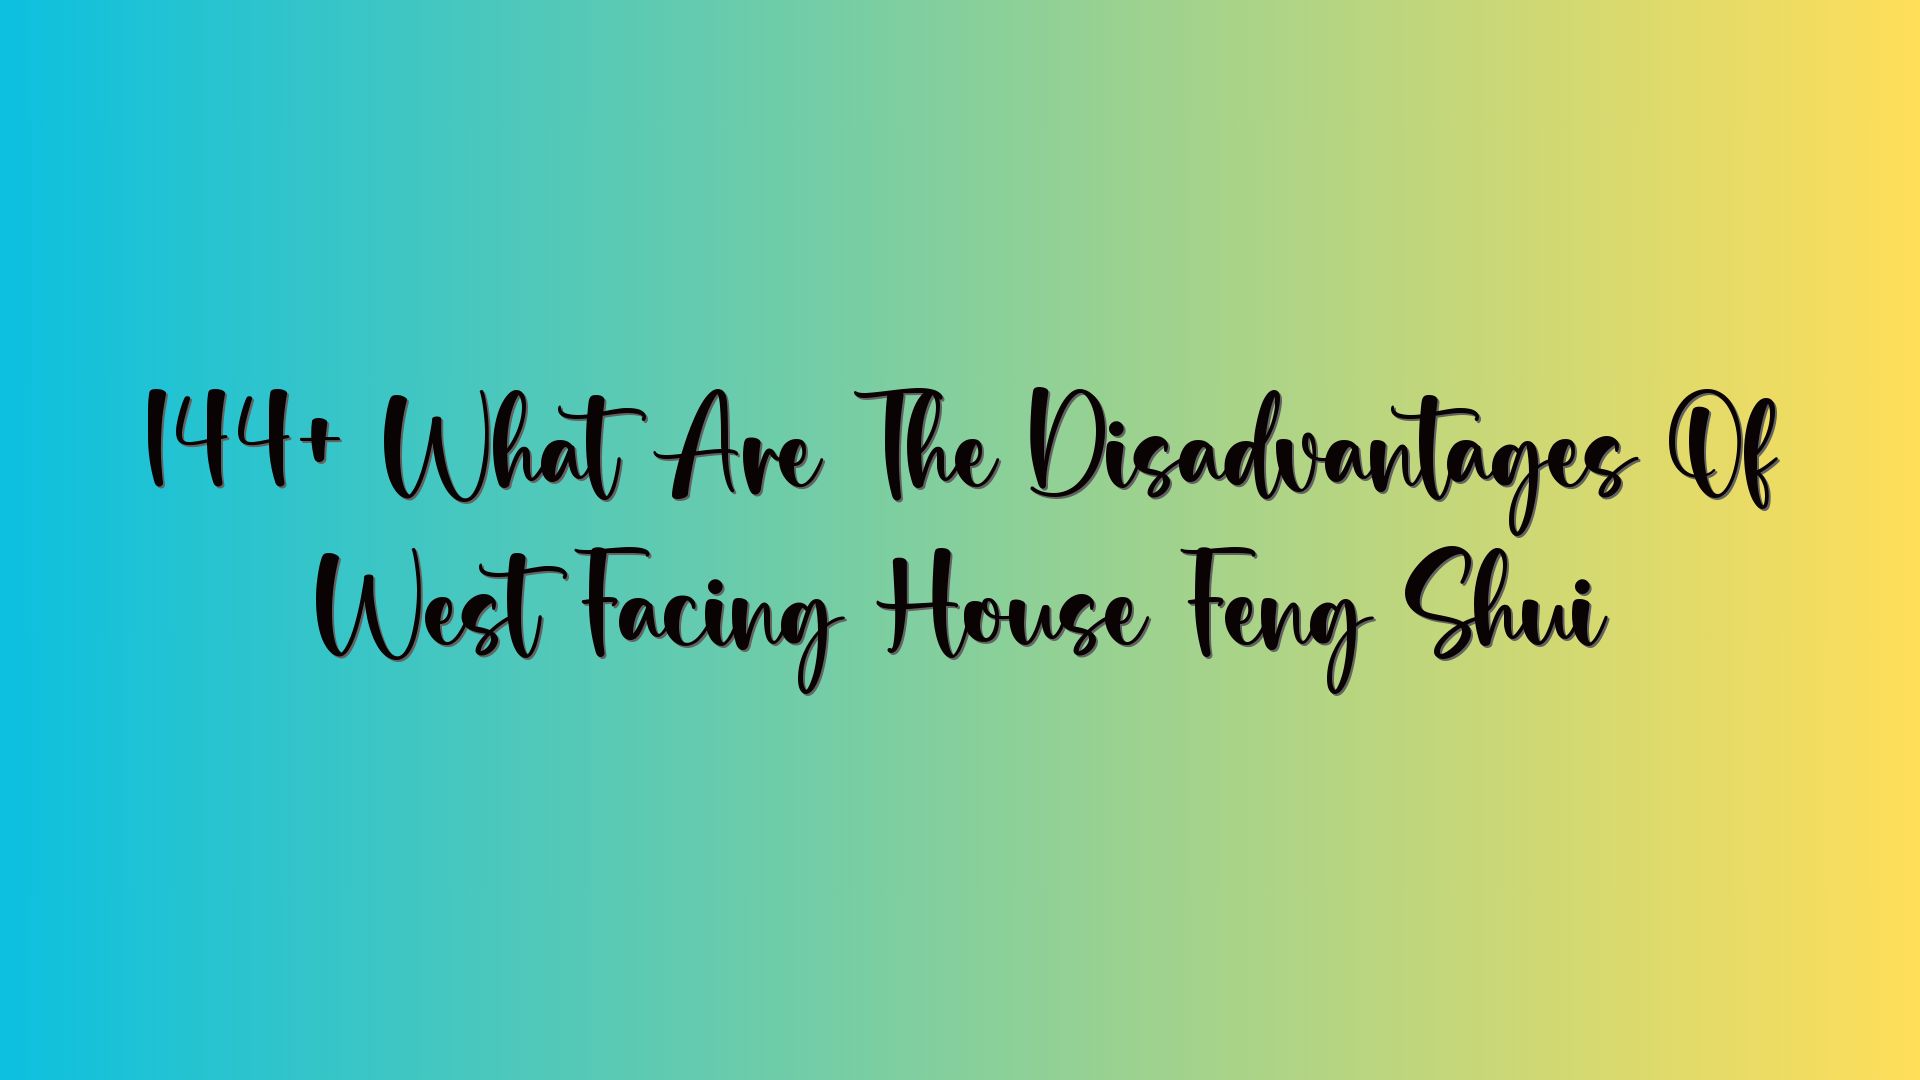 144+ What Are The Disadvantages Of West Facing House Feng Shui